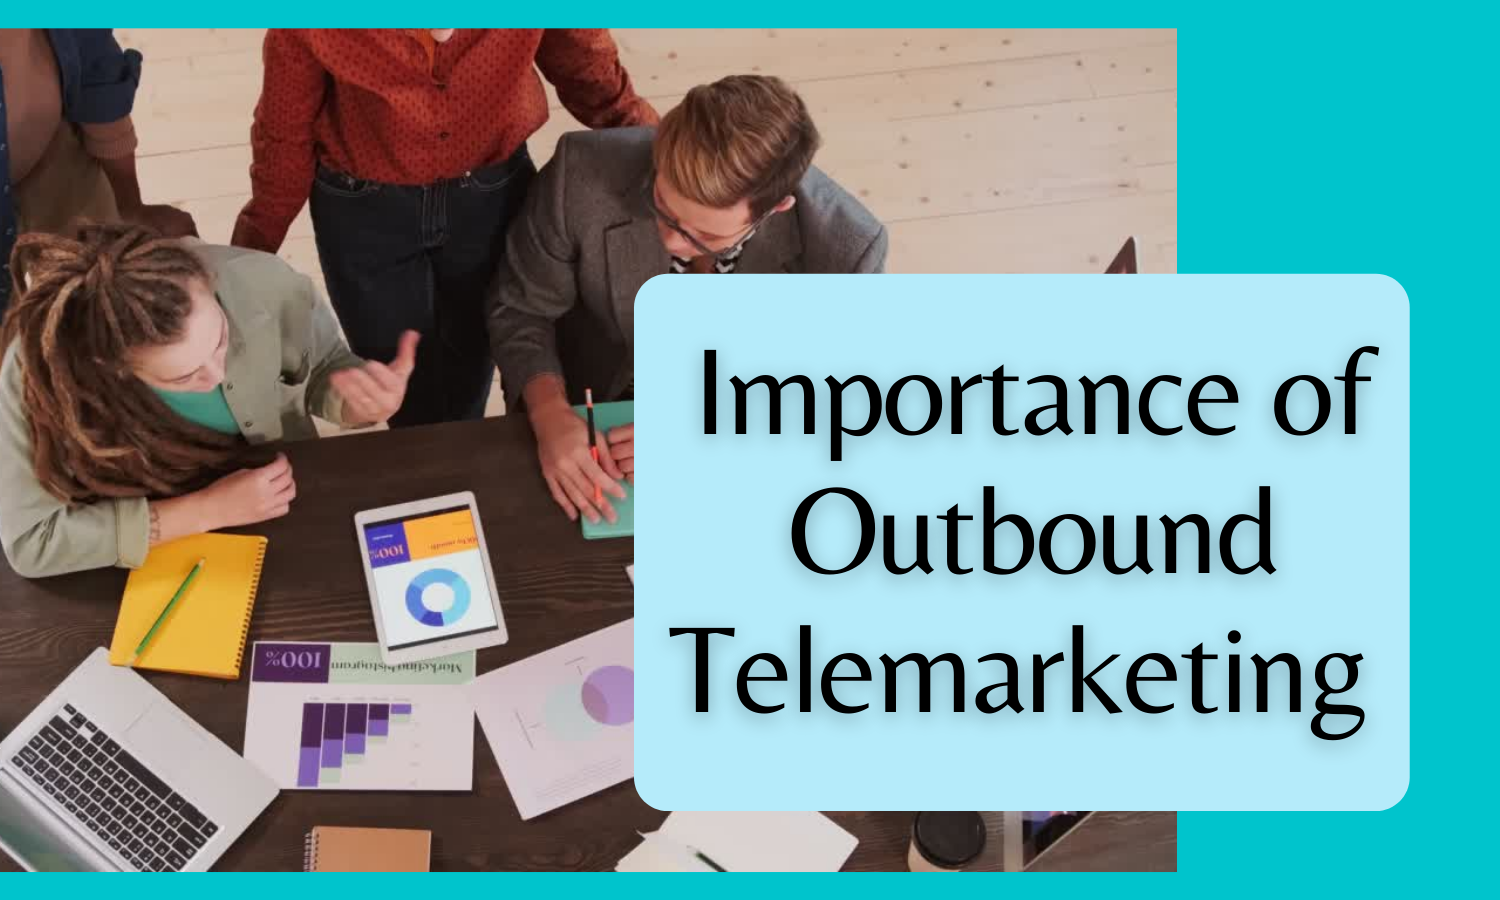 public/uploads/2021/07/Outbound-Telemarketing-.png